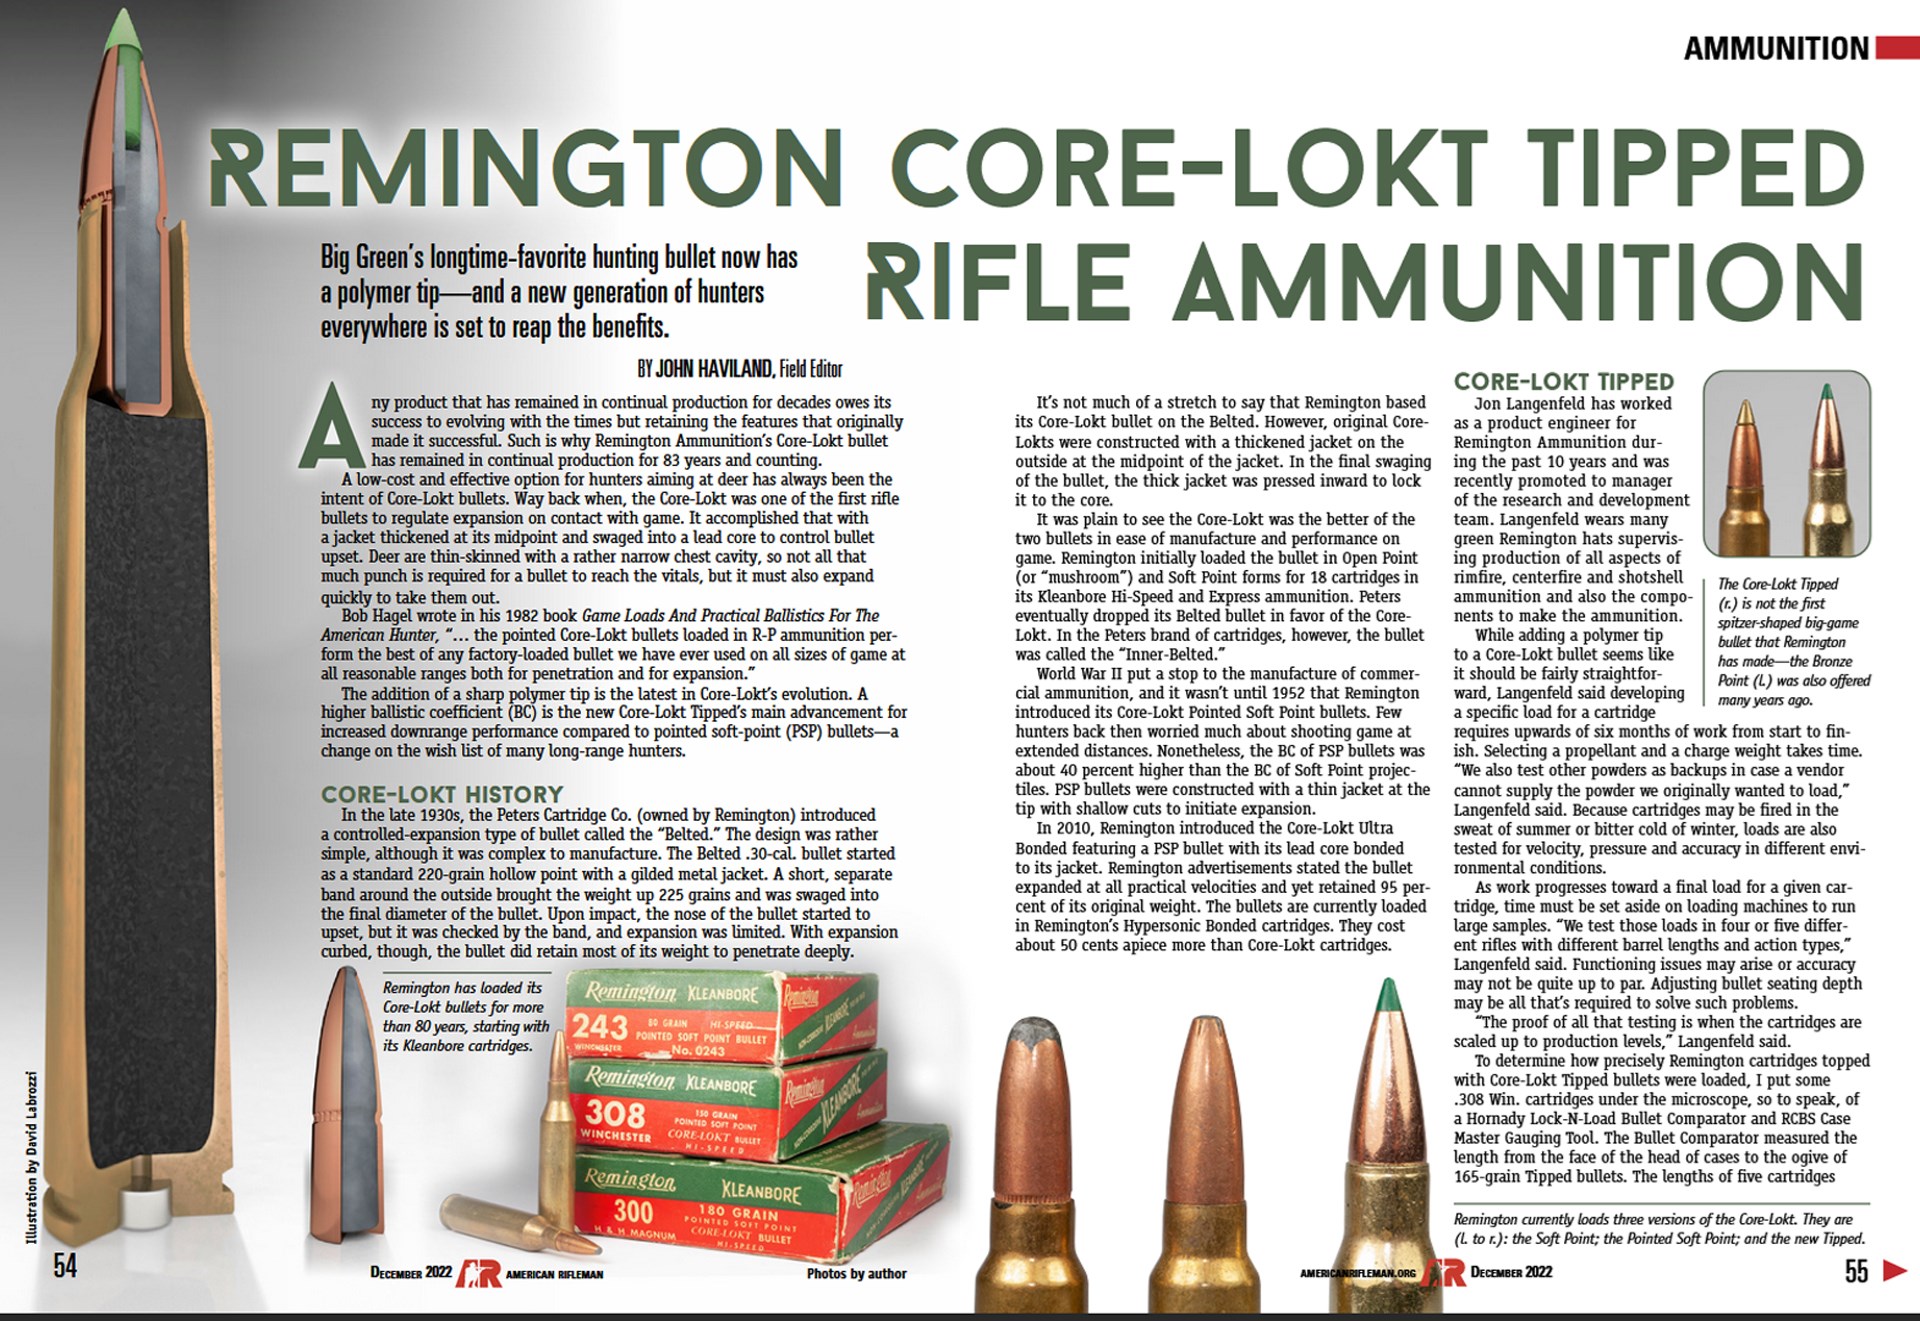 Magazine article screenshot text on image "REMINGTON CORE-LOKT TIPPED RIFLE AMMUNITION" by John Haviland about new bullets hunting rifles